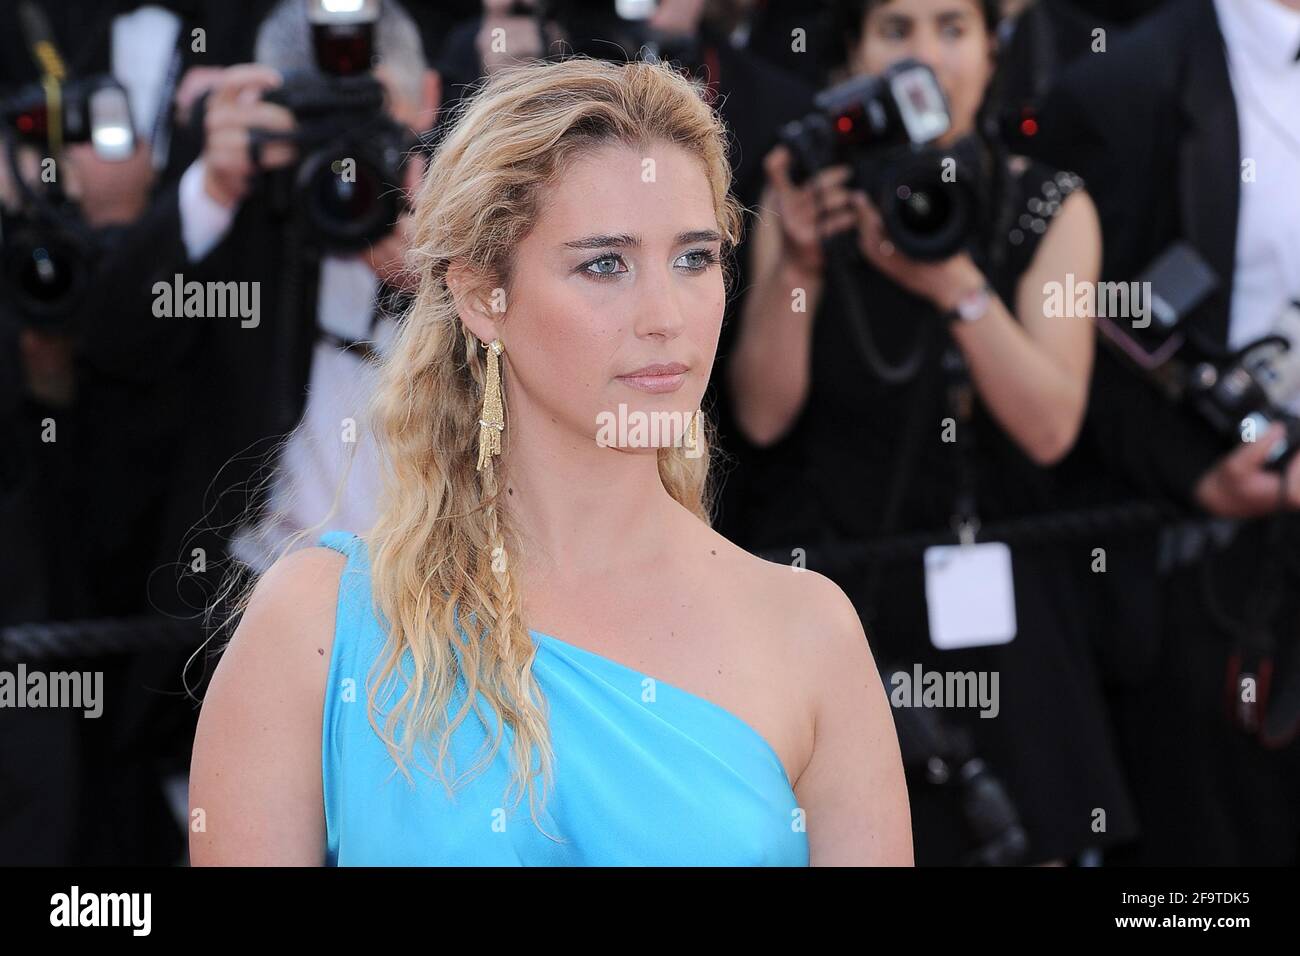 Cannes, France. 16 May 2012 Opening red carpet and Premiere film Moonrise Kingdom during 65th Cannes Film Festival Stock Photo